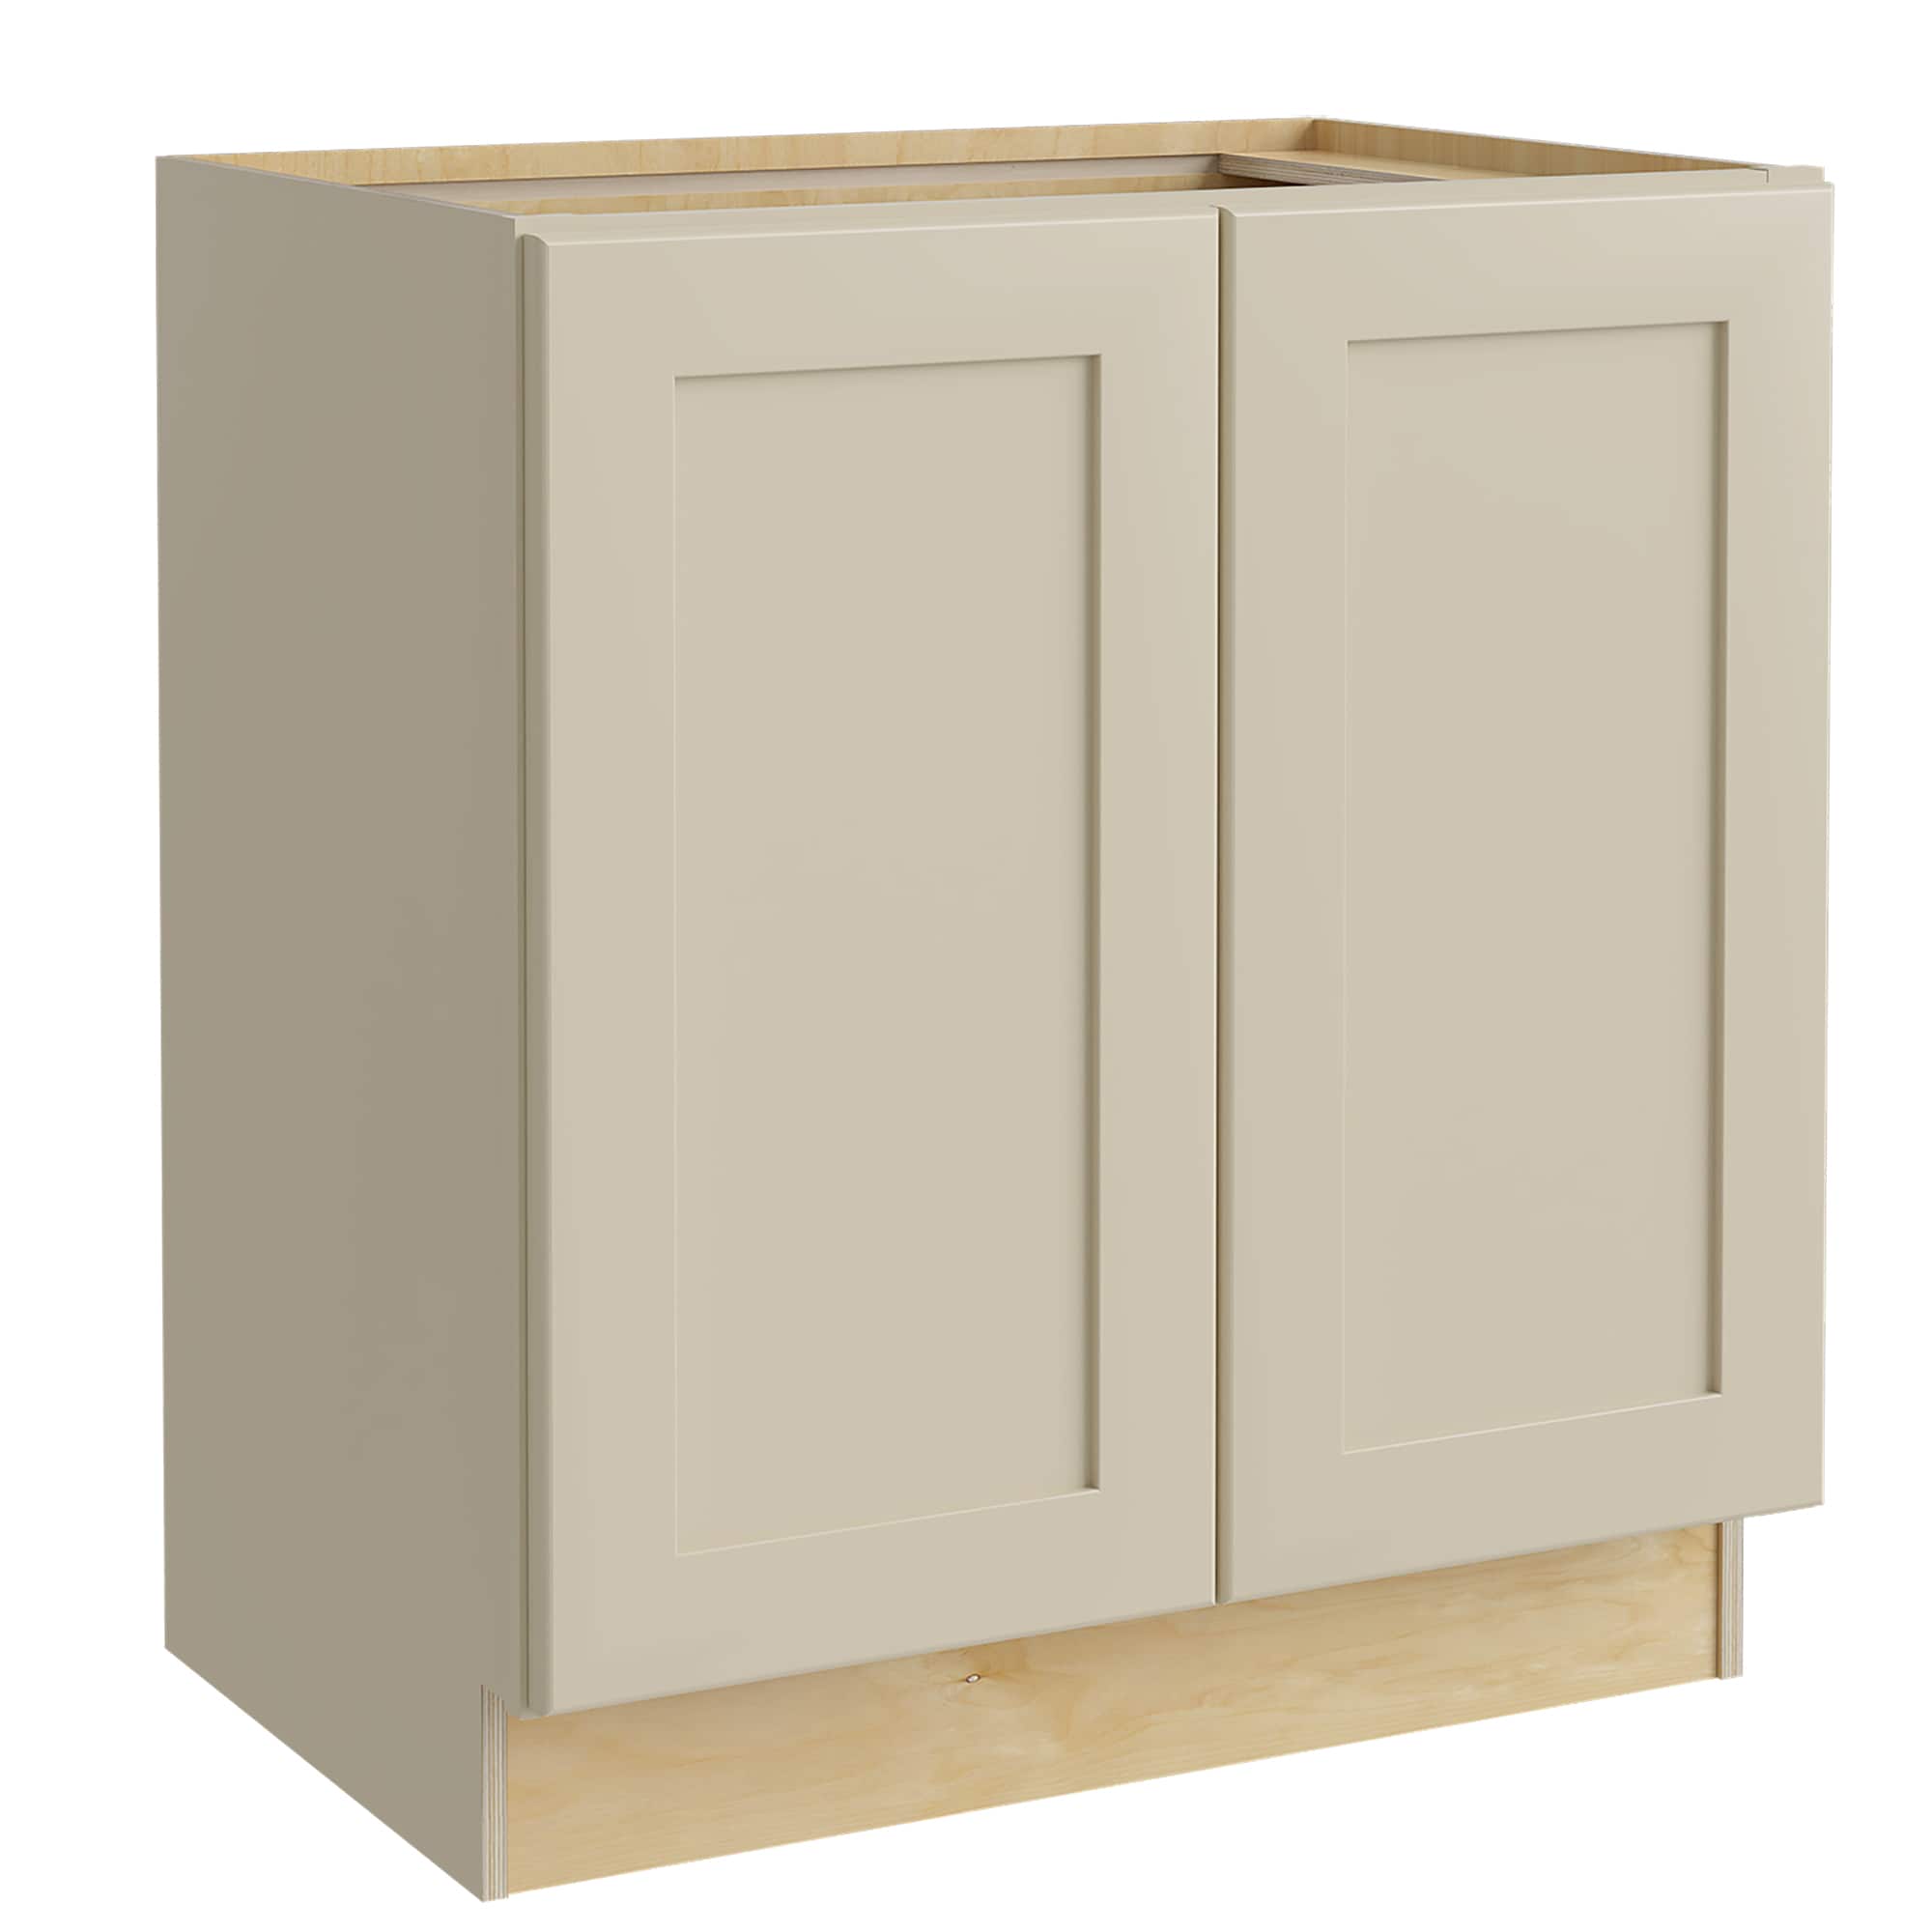 Luxxe Cabinetry 24-in W x 34.5-in H x 24-in D Norfolk Blended Cream Painted Door Base Fully Assembled Semi-custom Cabinet in Off-White | B24FH-NBC